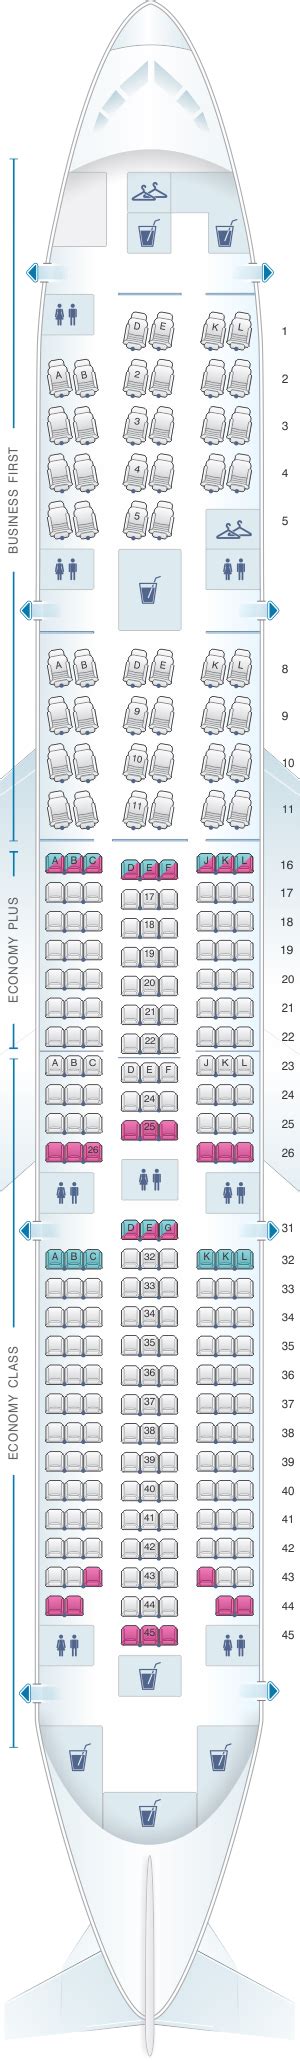 Detailed seat map United Airlines Boeing B777 200 (777